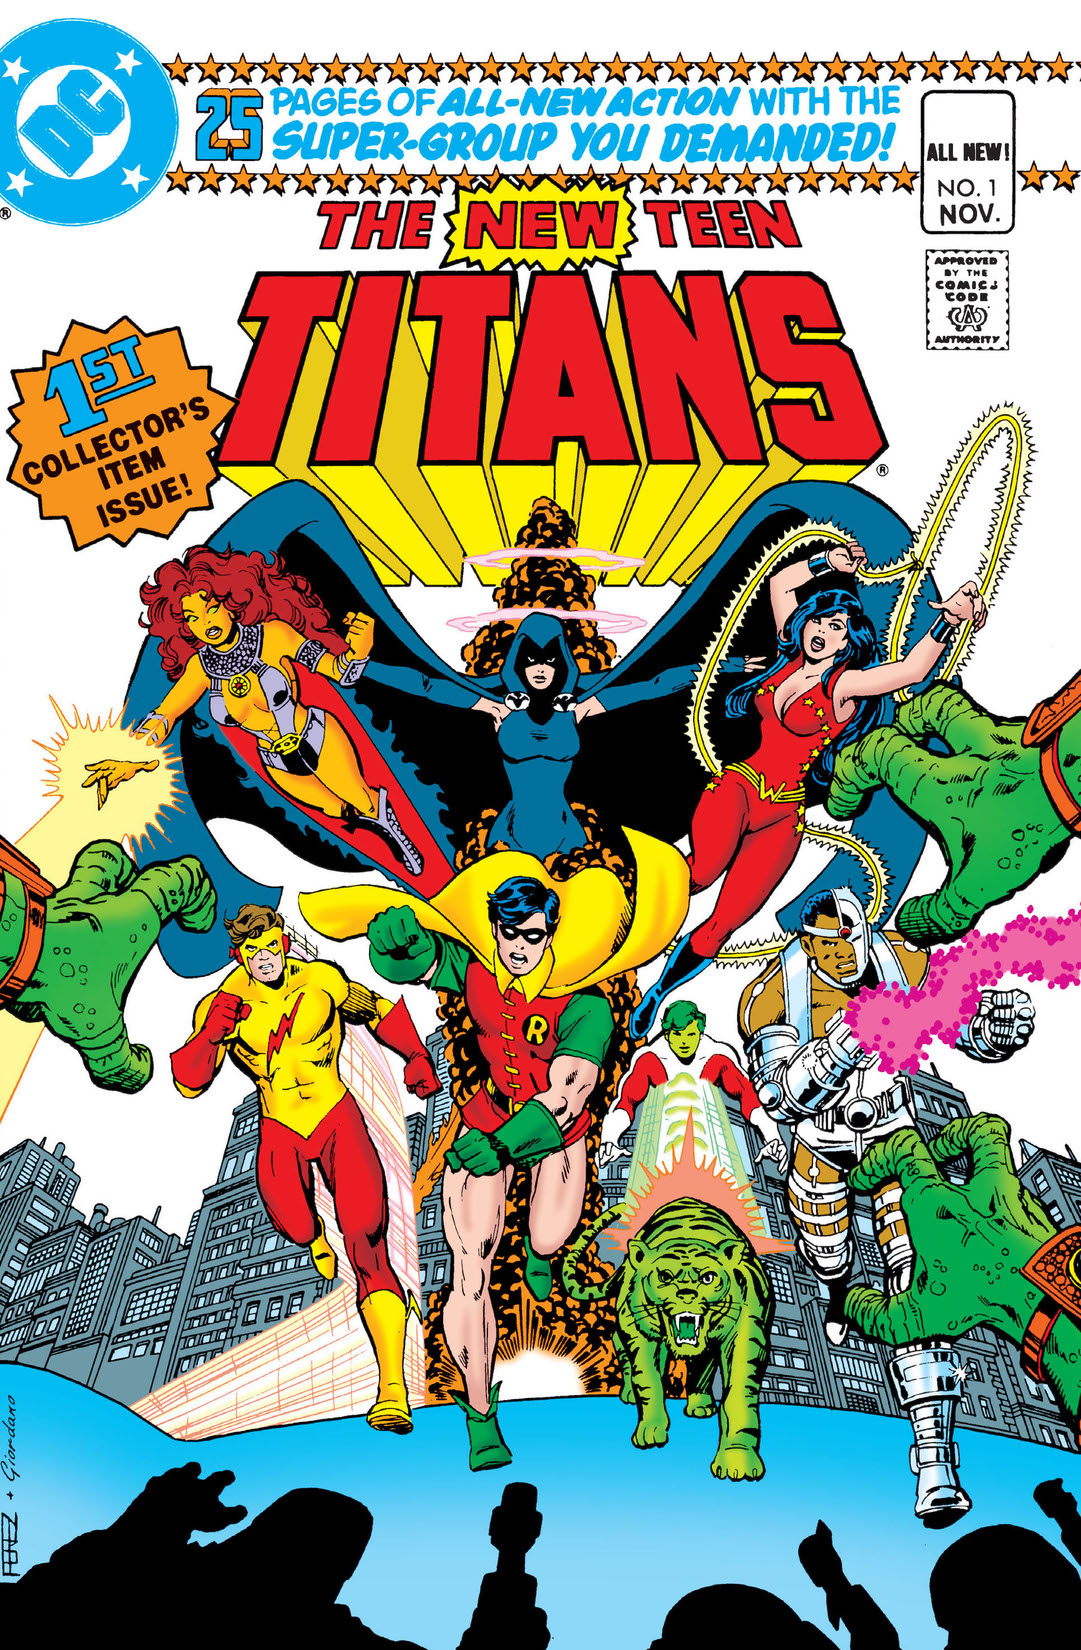 The New Teen Titans #1 preview images